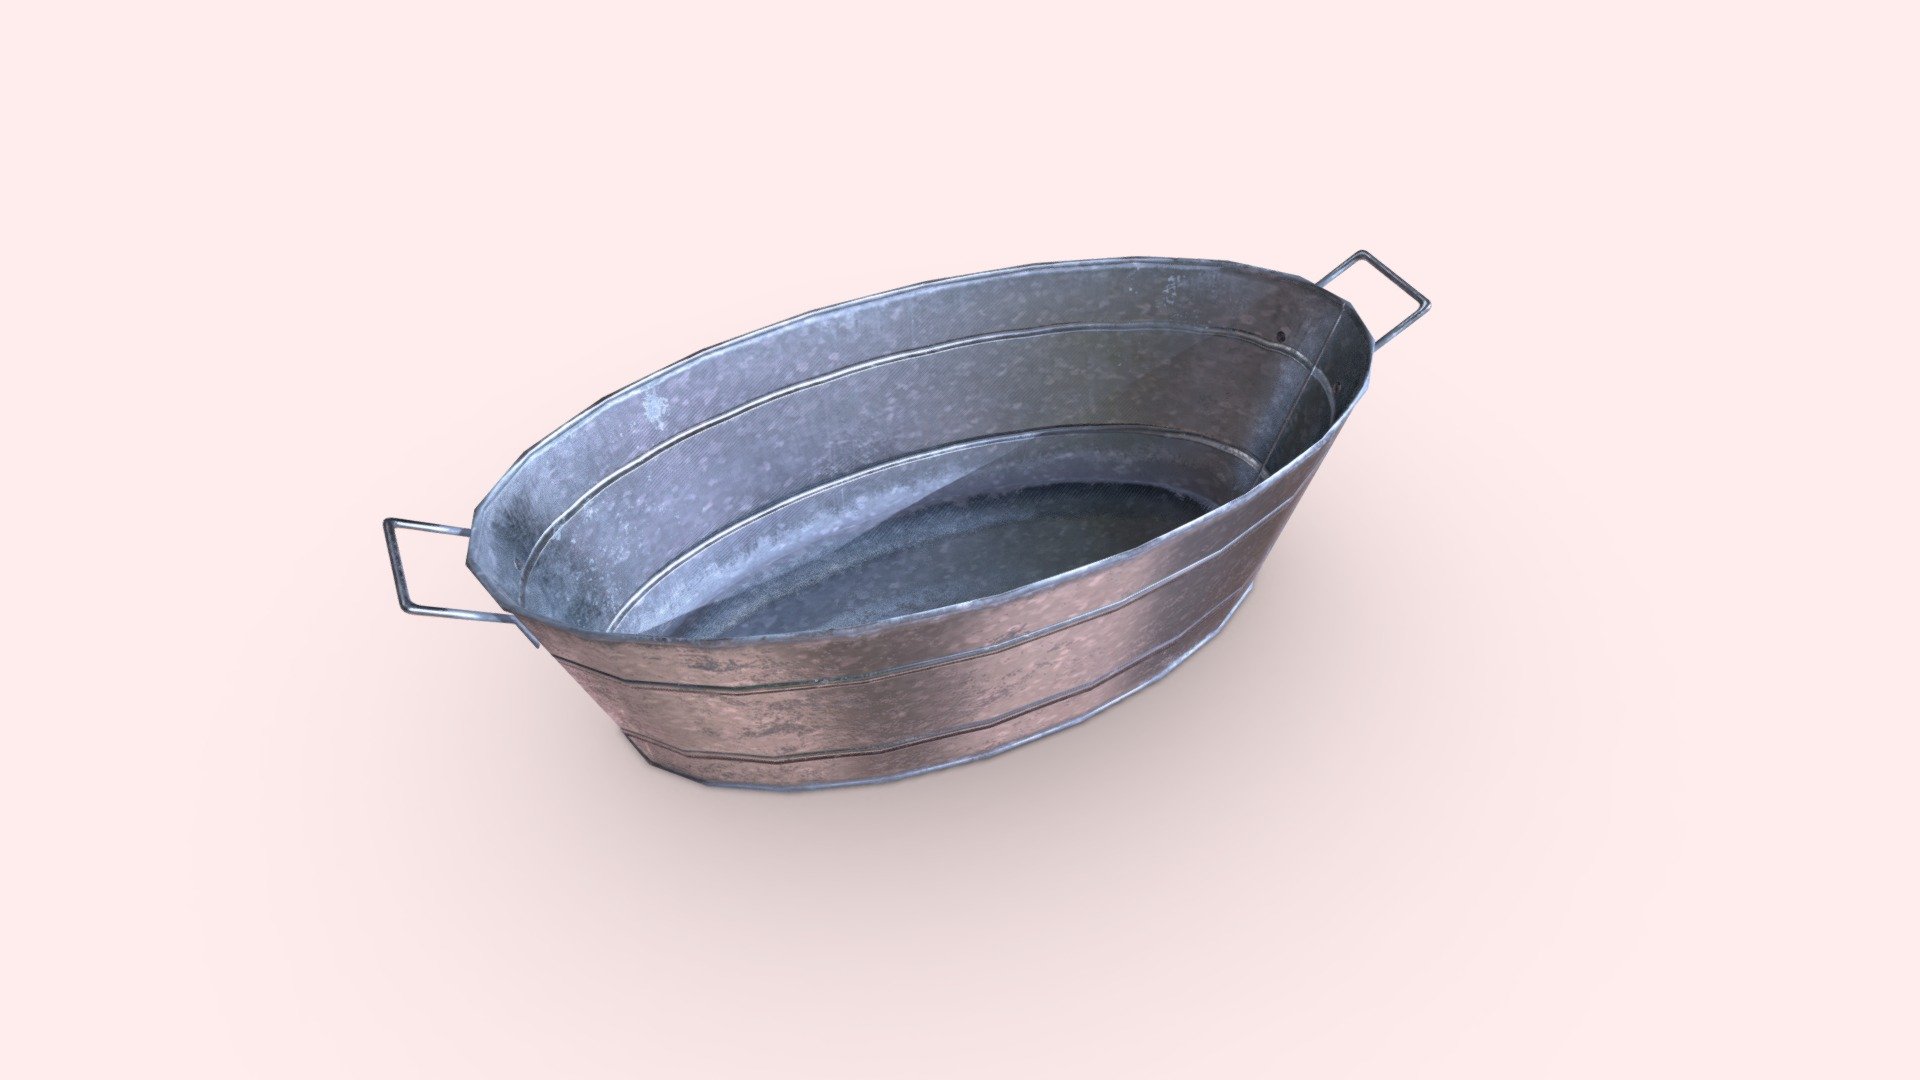 Low poly Old School Steel Tub model.
Created in 3dsMax and Substance Painter.

Model has 2 LOD levels.
PBR textures for MetalRough setup. 2048x2048 .png
Ready for Unity and Unreal game engines - Steel Tub | Game Assets - Buy Royalty Free 3D model by PropDrop (@PropDrop.xyz) 3d model